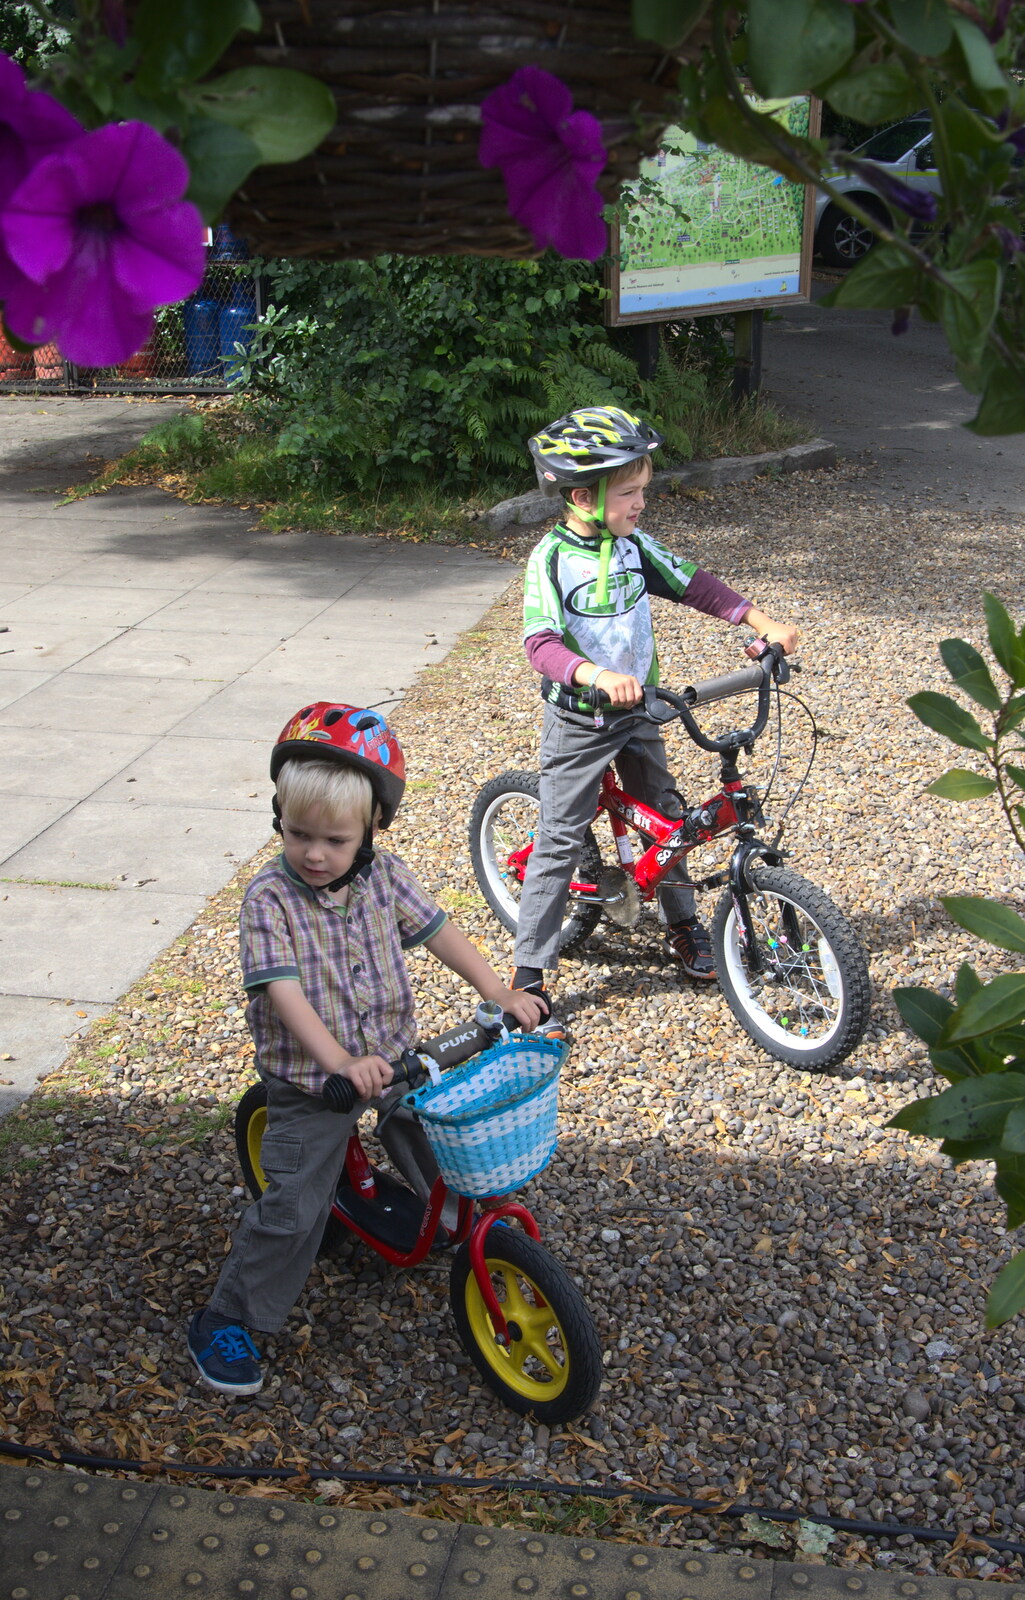 The boys on their bikes from The Archaeology of Dunwich: A Camping Trip, Dunwich, Suffolk - 1st August 2015